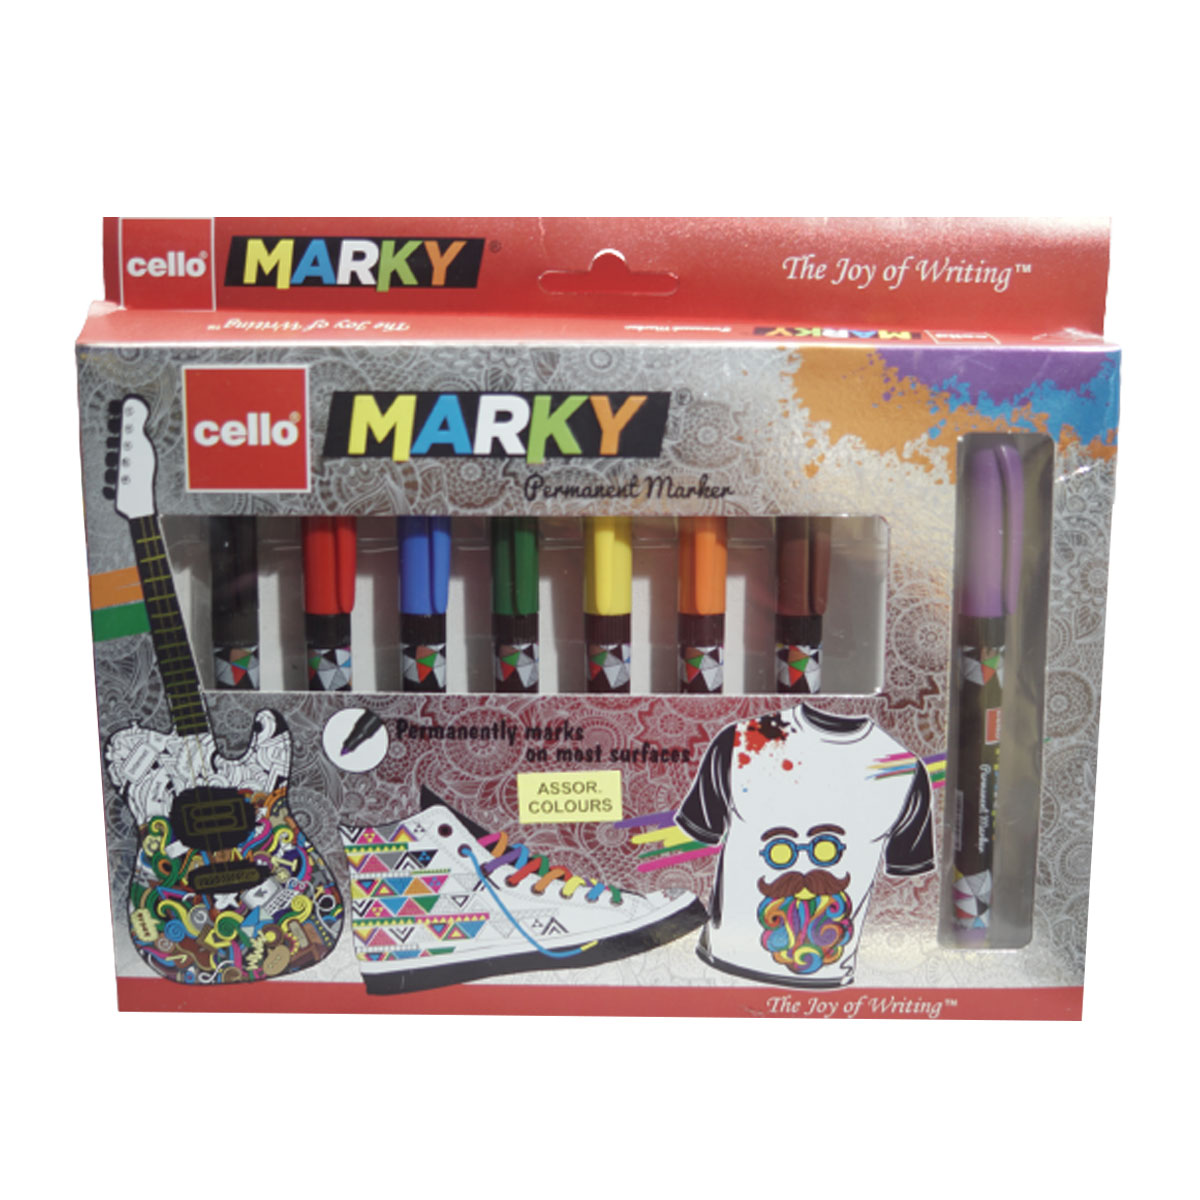 Cello Marky Assorted With 8 Different Color Permanent Marker SKU 20292